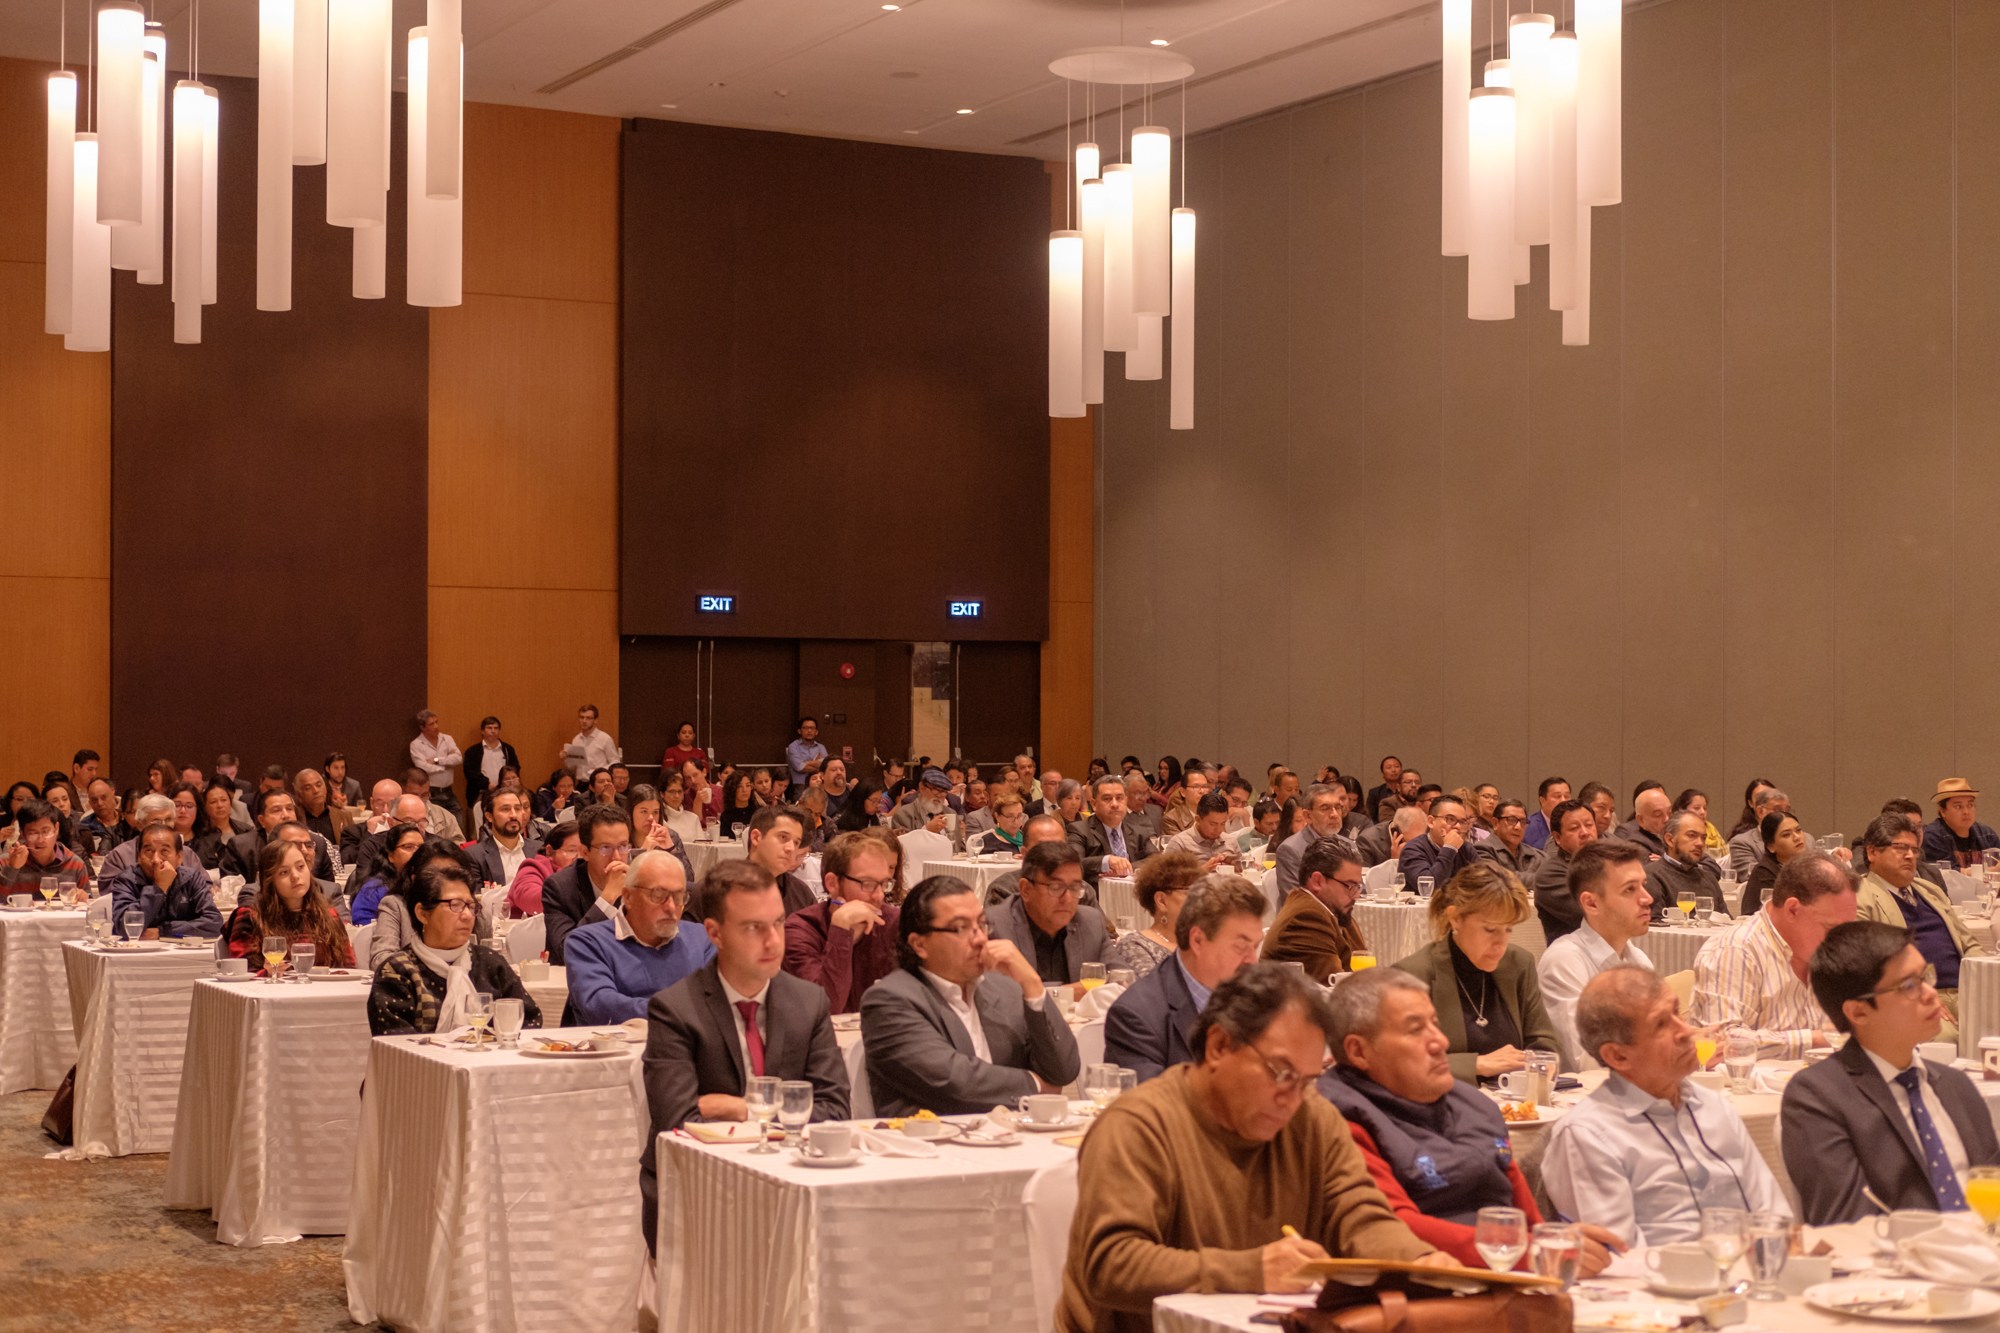 Attendees in Guatemala listen to Professor Call's presentation of his findings on CICIG.